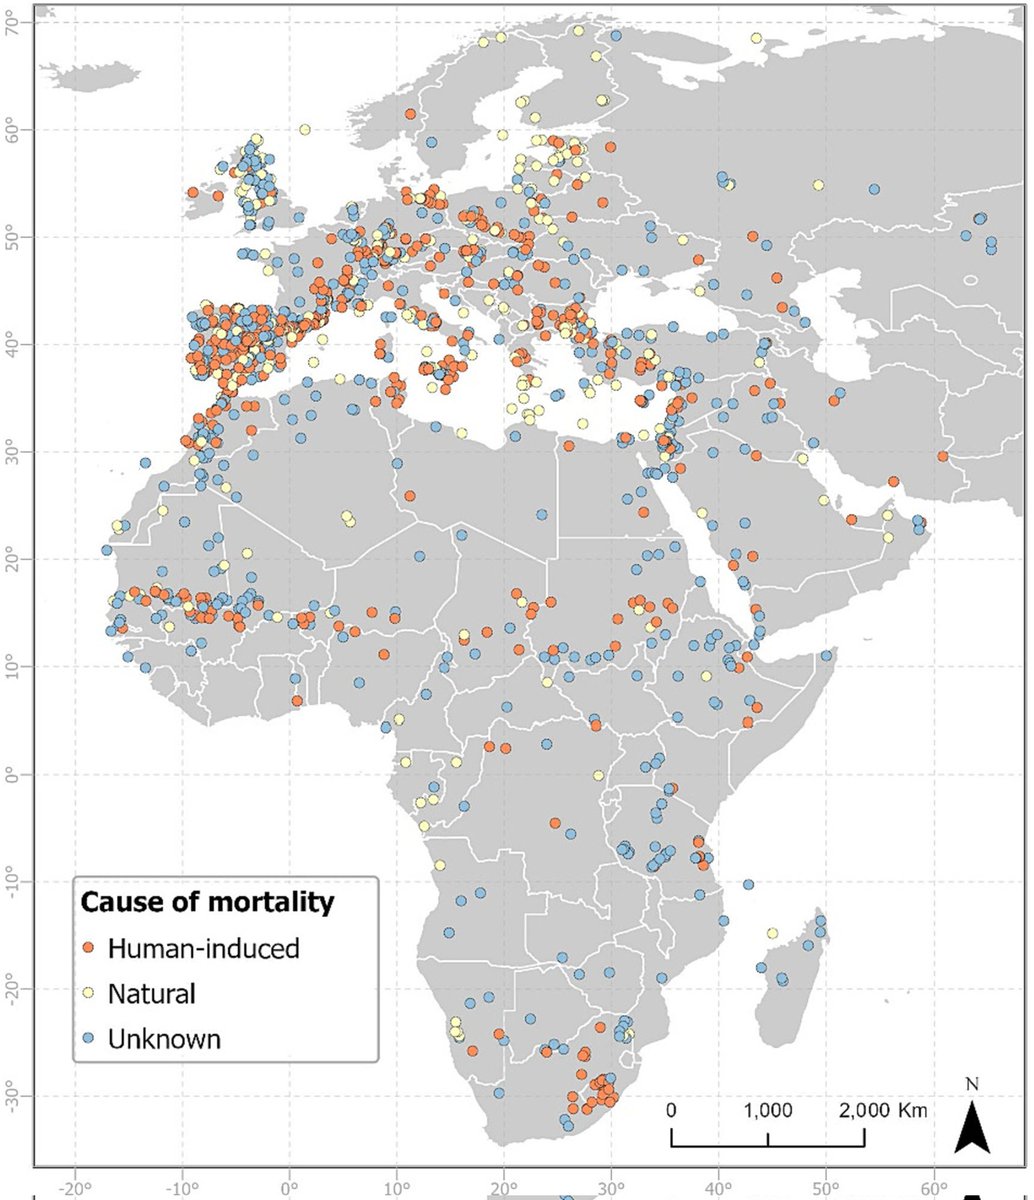 The collective effort of many researchers and organizations, led by @BirdLife_Sci reveals with data from 45 large migratory species that anthropogenic causes are main source of mortality at a flyway scale, energy infrastructure representing 49% casualties sciencedirect.com/science/articl…